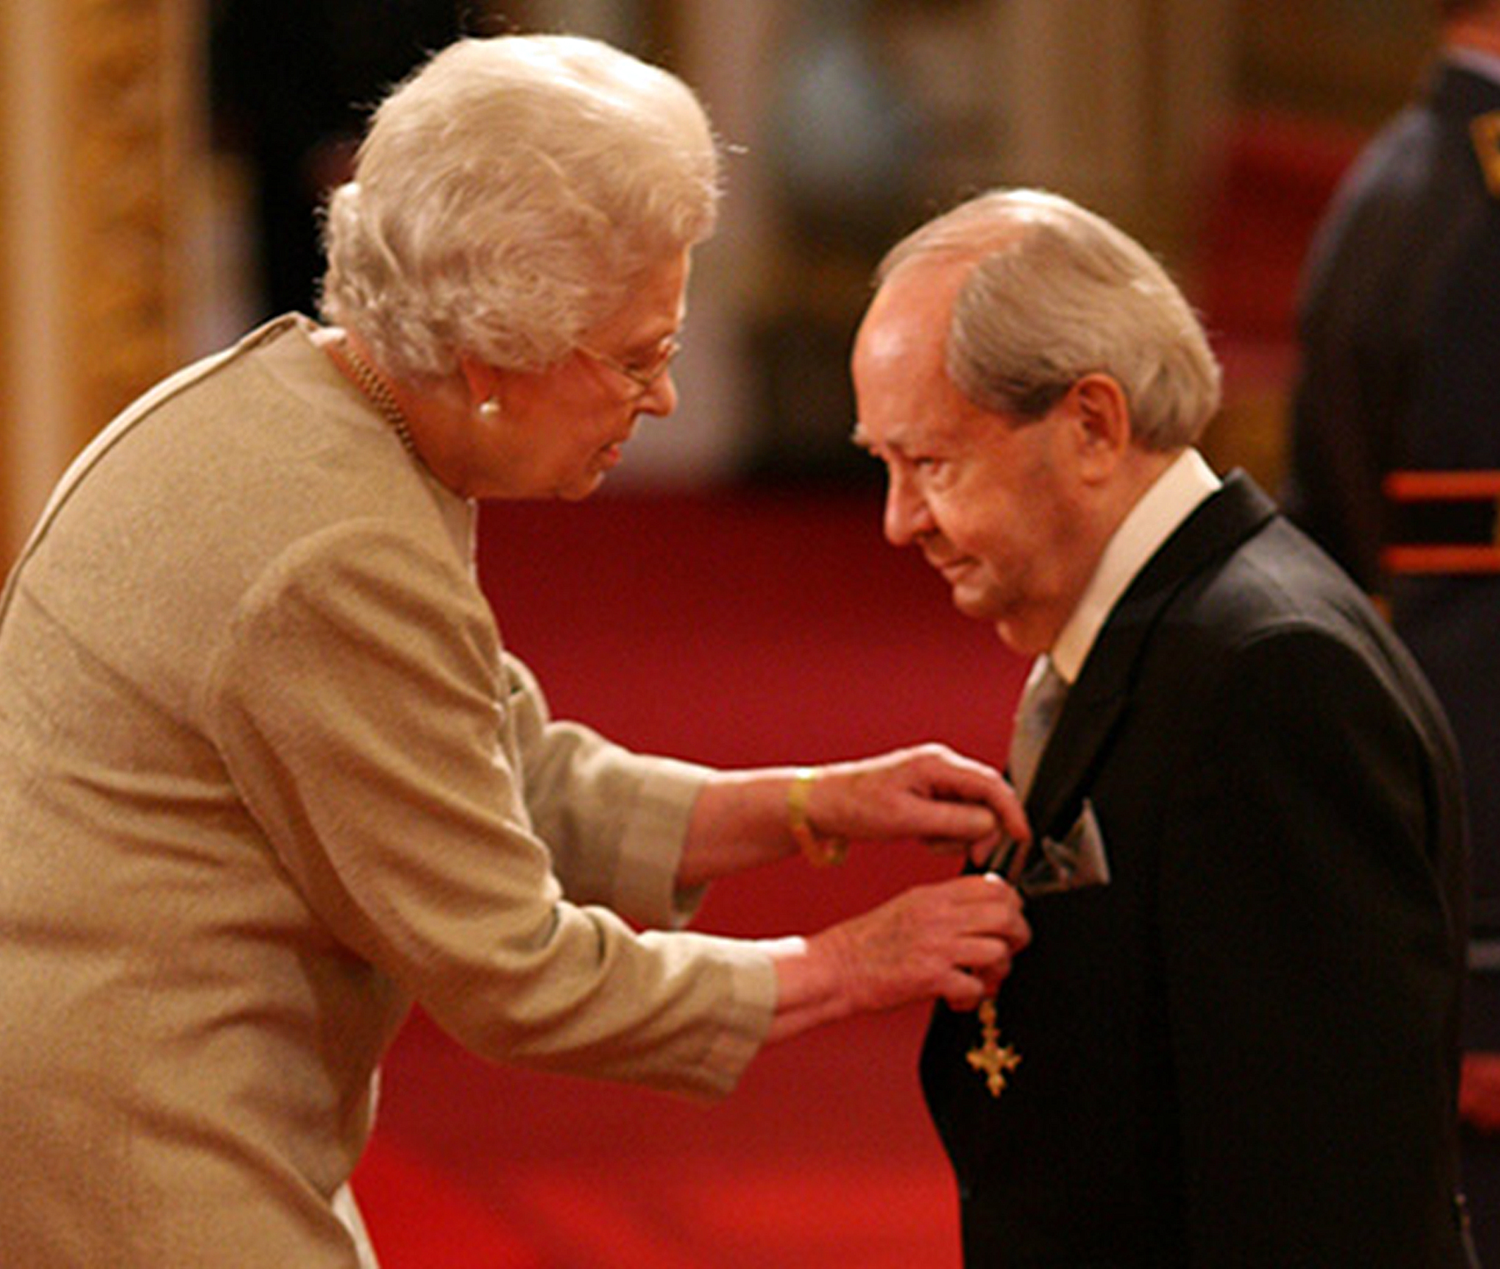 Peter Sallis is being awarded the Order Of The British Empire by Her Imperial and Royal Majesty Queen Elizabeth II on June 14, 2007.